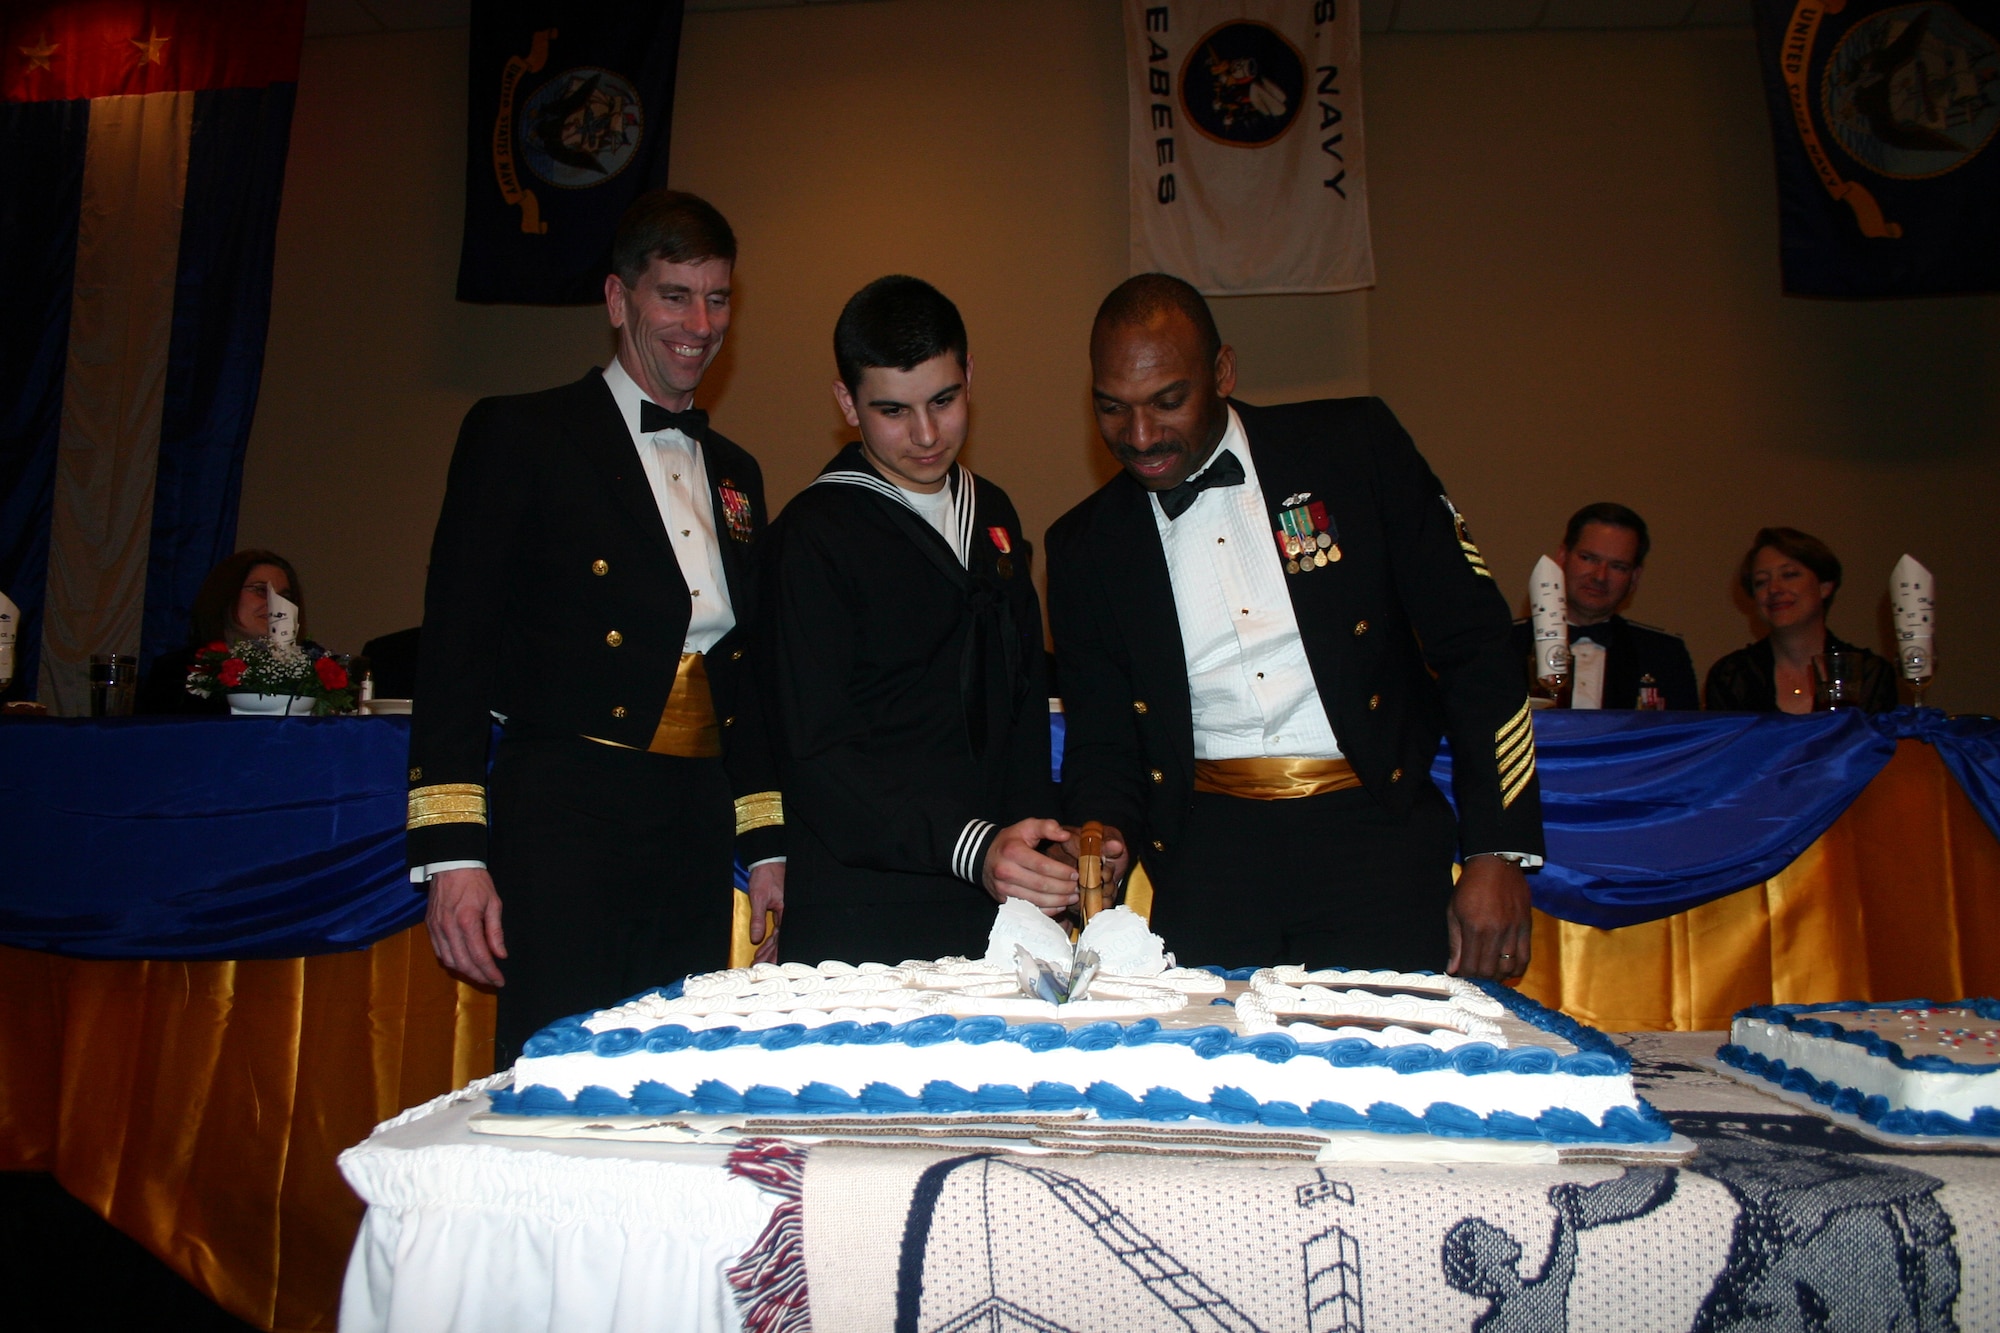 Navy Rear Admiral Mark Handley observes as Seaman Alex Spears and Senior Chief Petty Officer Todd Bolden, the youngest and oldest Seabees in attendance, cut the cake during the Seabee Ball at the Howard Johnson Plaza Hotel March 3. (U.S. Air Force photo/Staff Sgt. Tonnette Thompson)